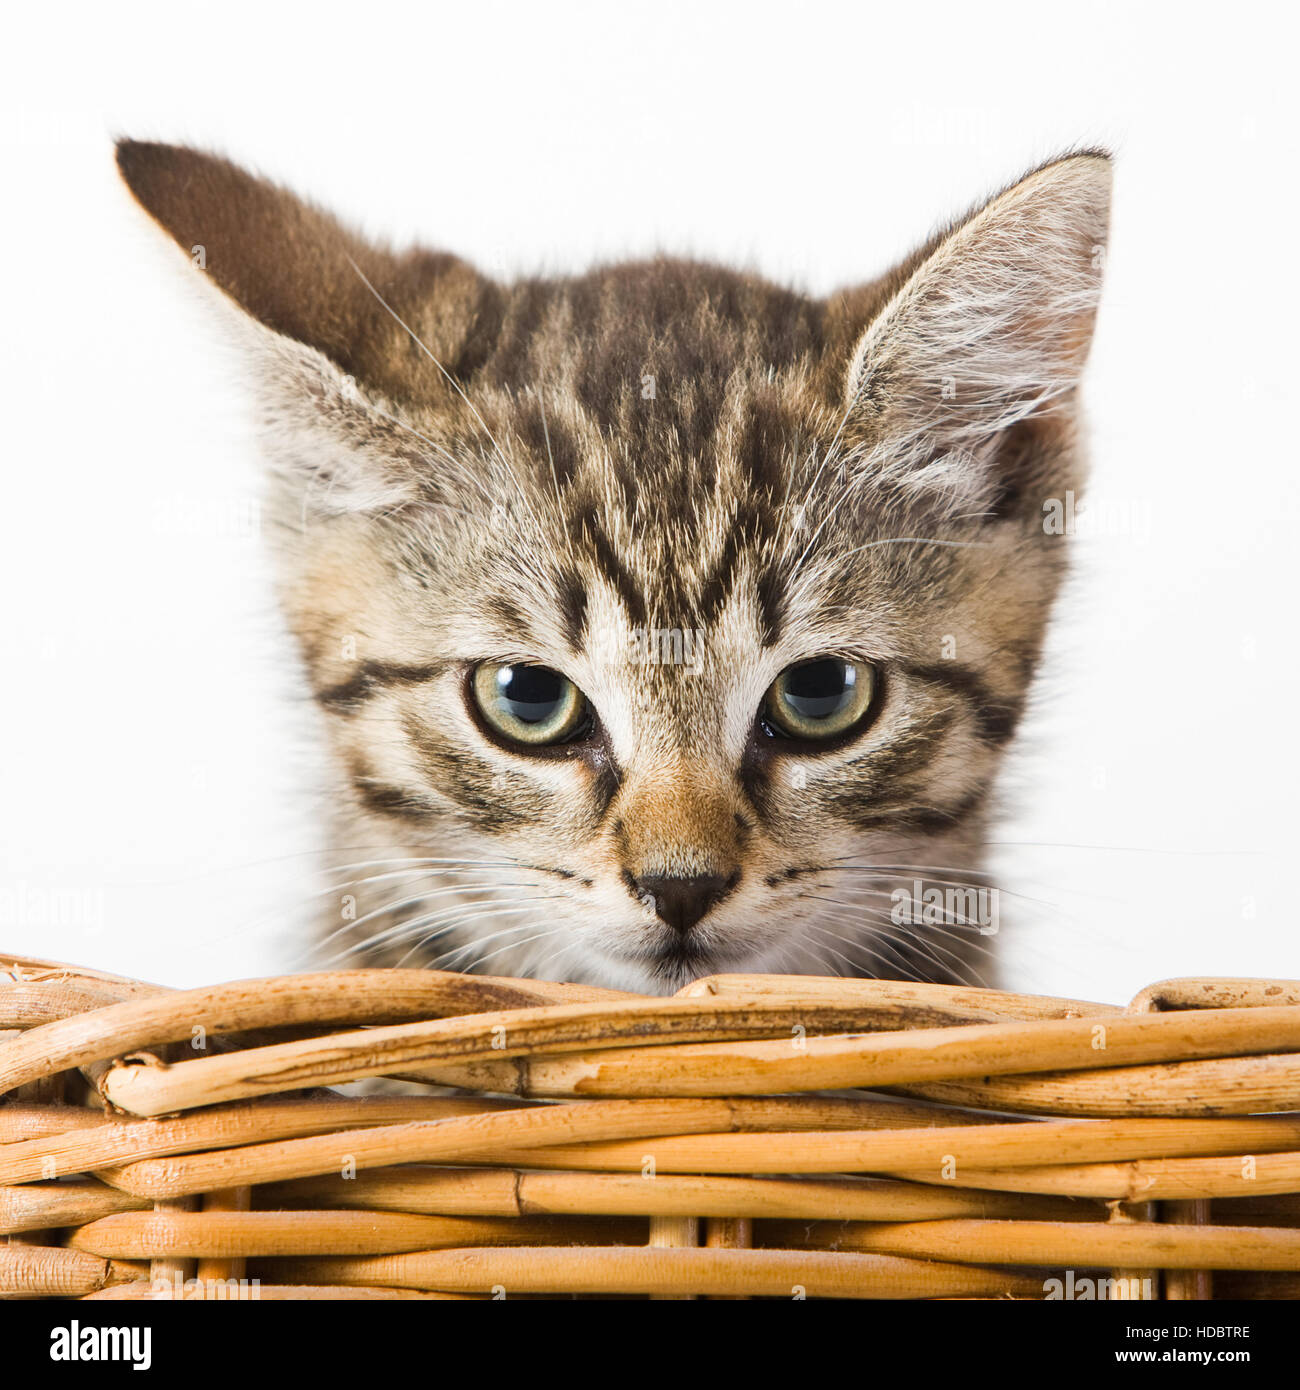 Domestic cat in a basket Stock Photo